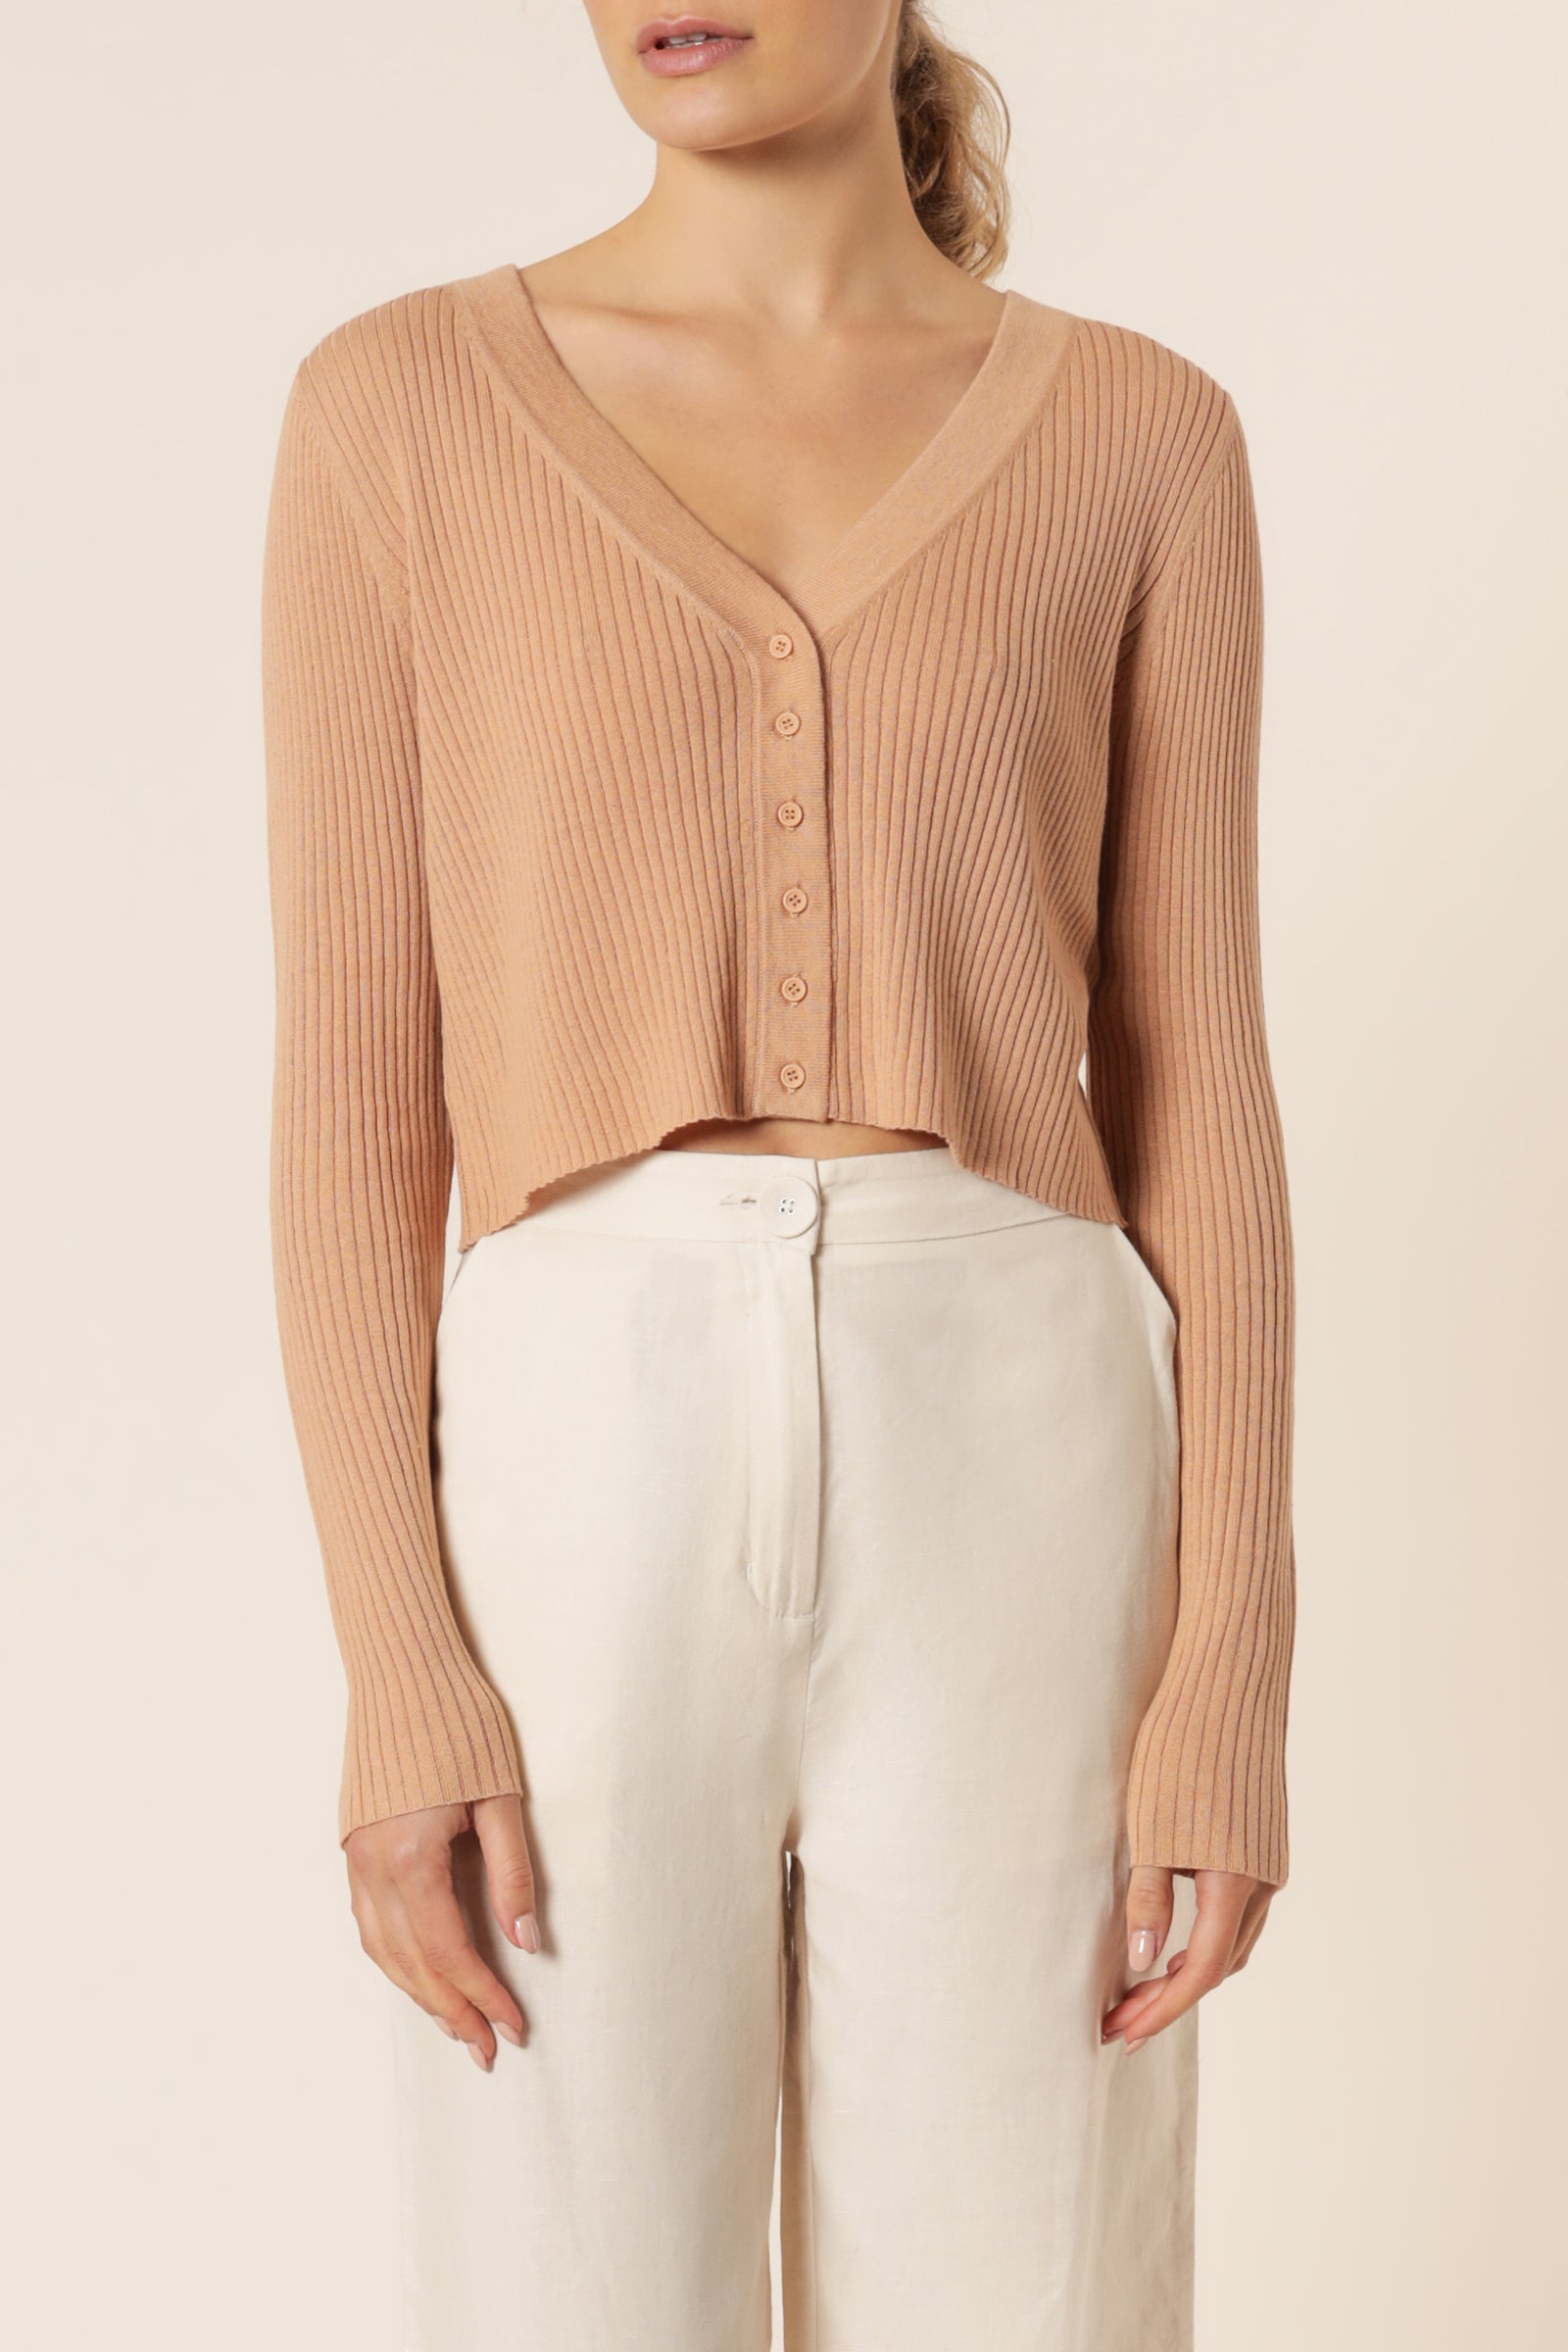 Nude Lucy alma cardi biscuit knits